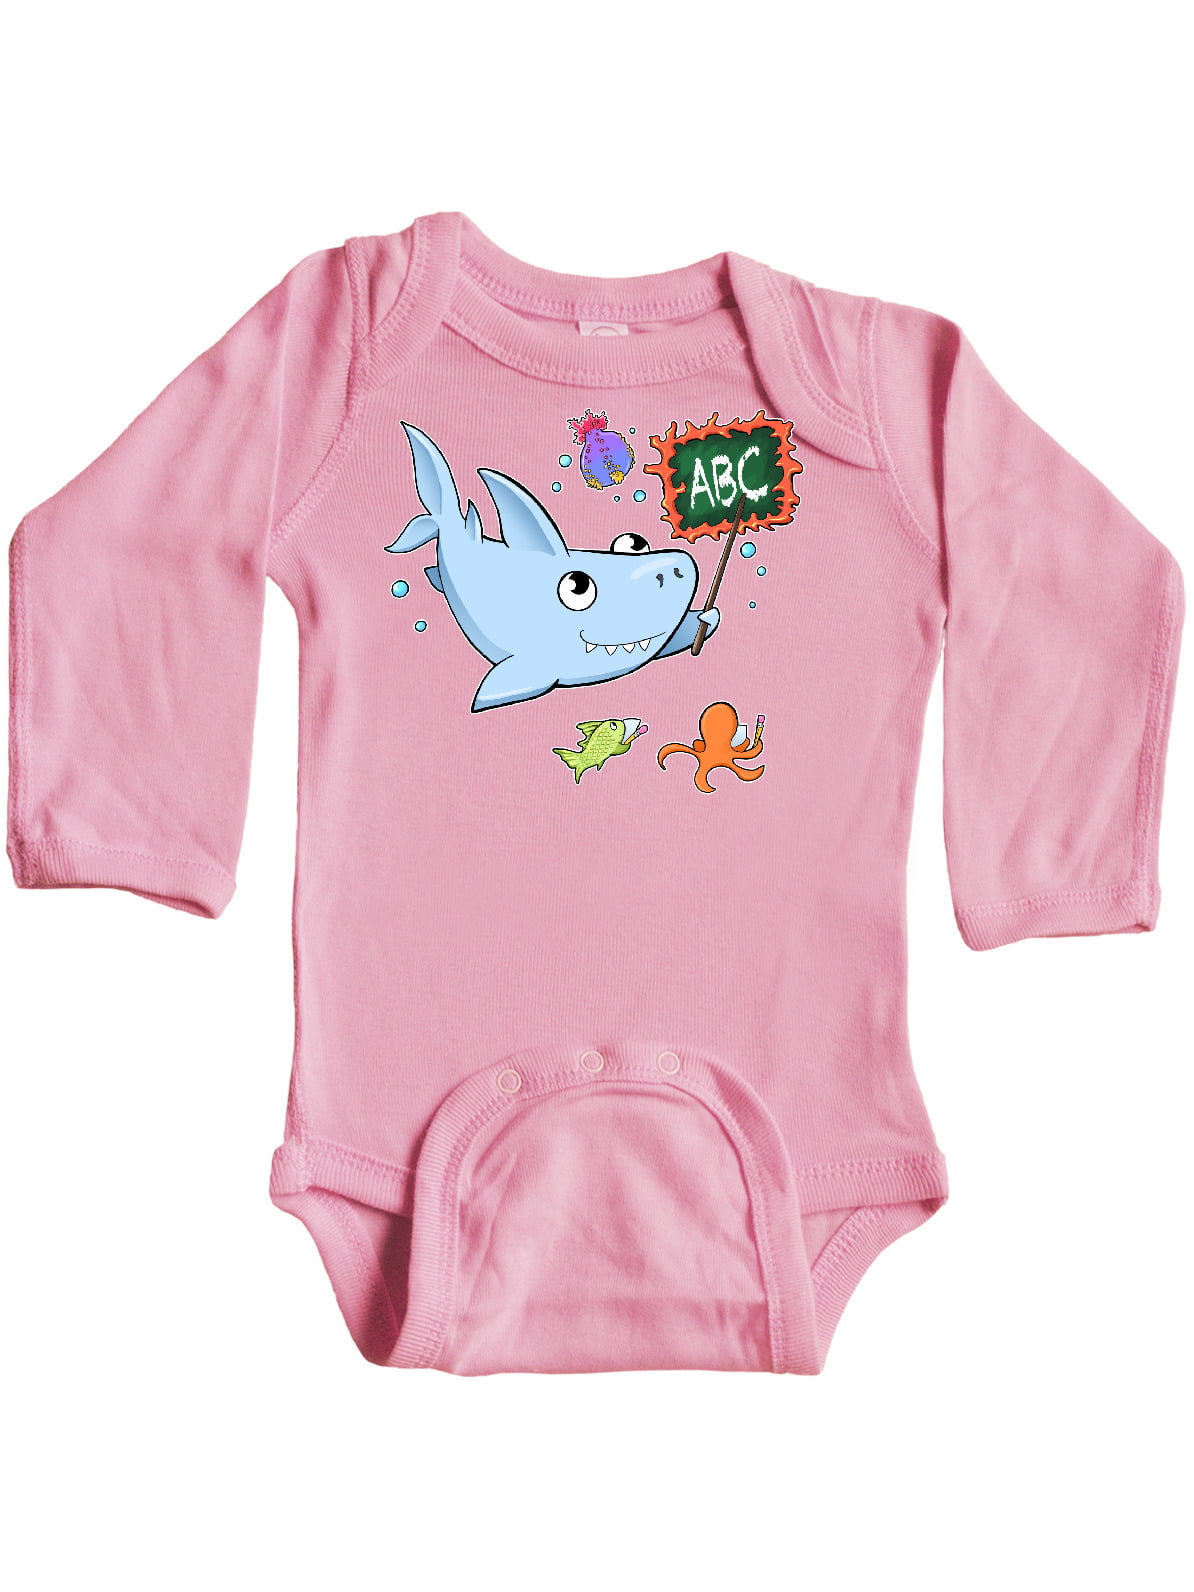 TO-JP Playing Dolphins Baby Short-Sleeve Onesies Bodysuit Baby Outfits 